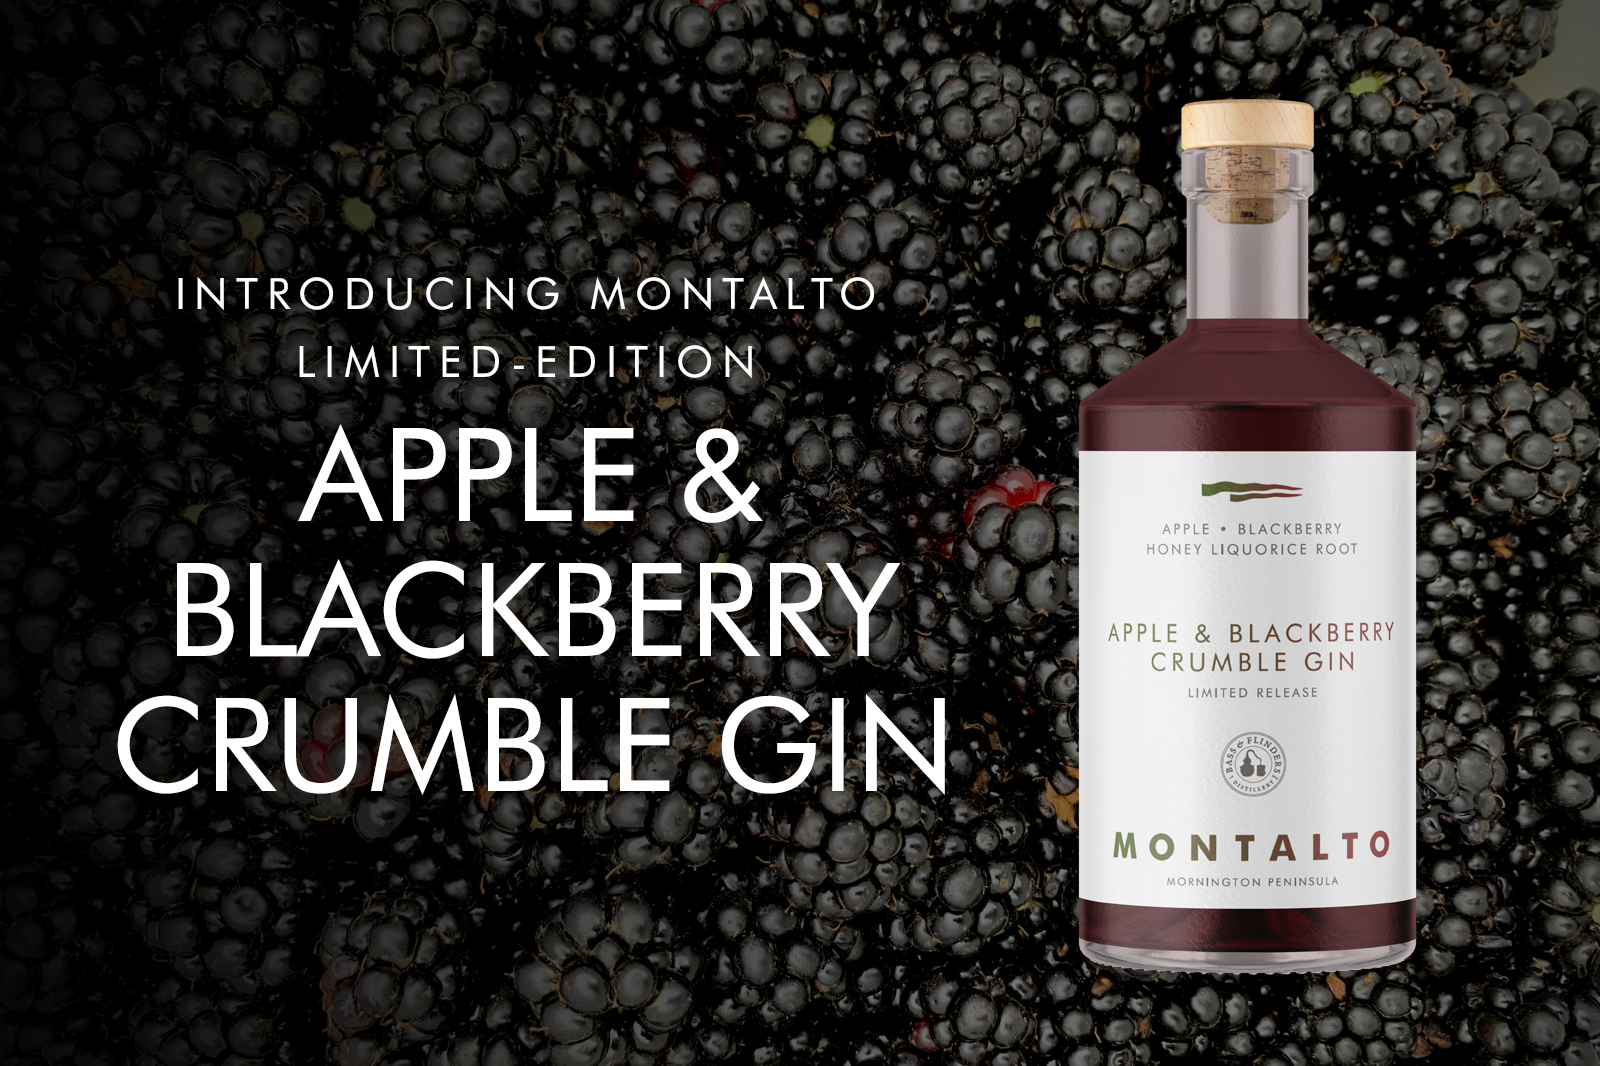 INTRODUCING MONTALTO LIMITED-EDITION APPLE & BLACKBERRY CRUMBLE GIN